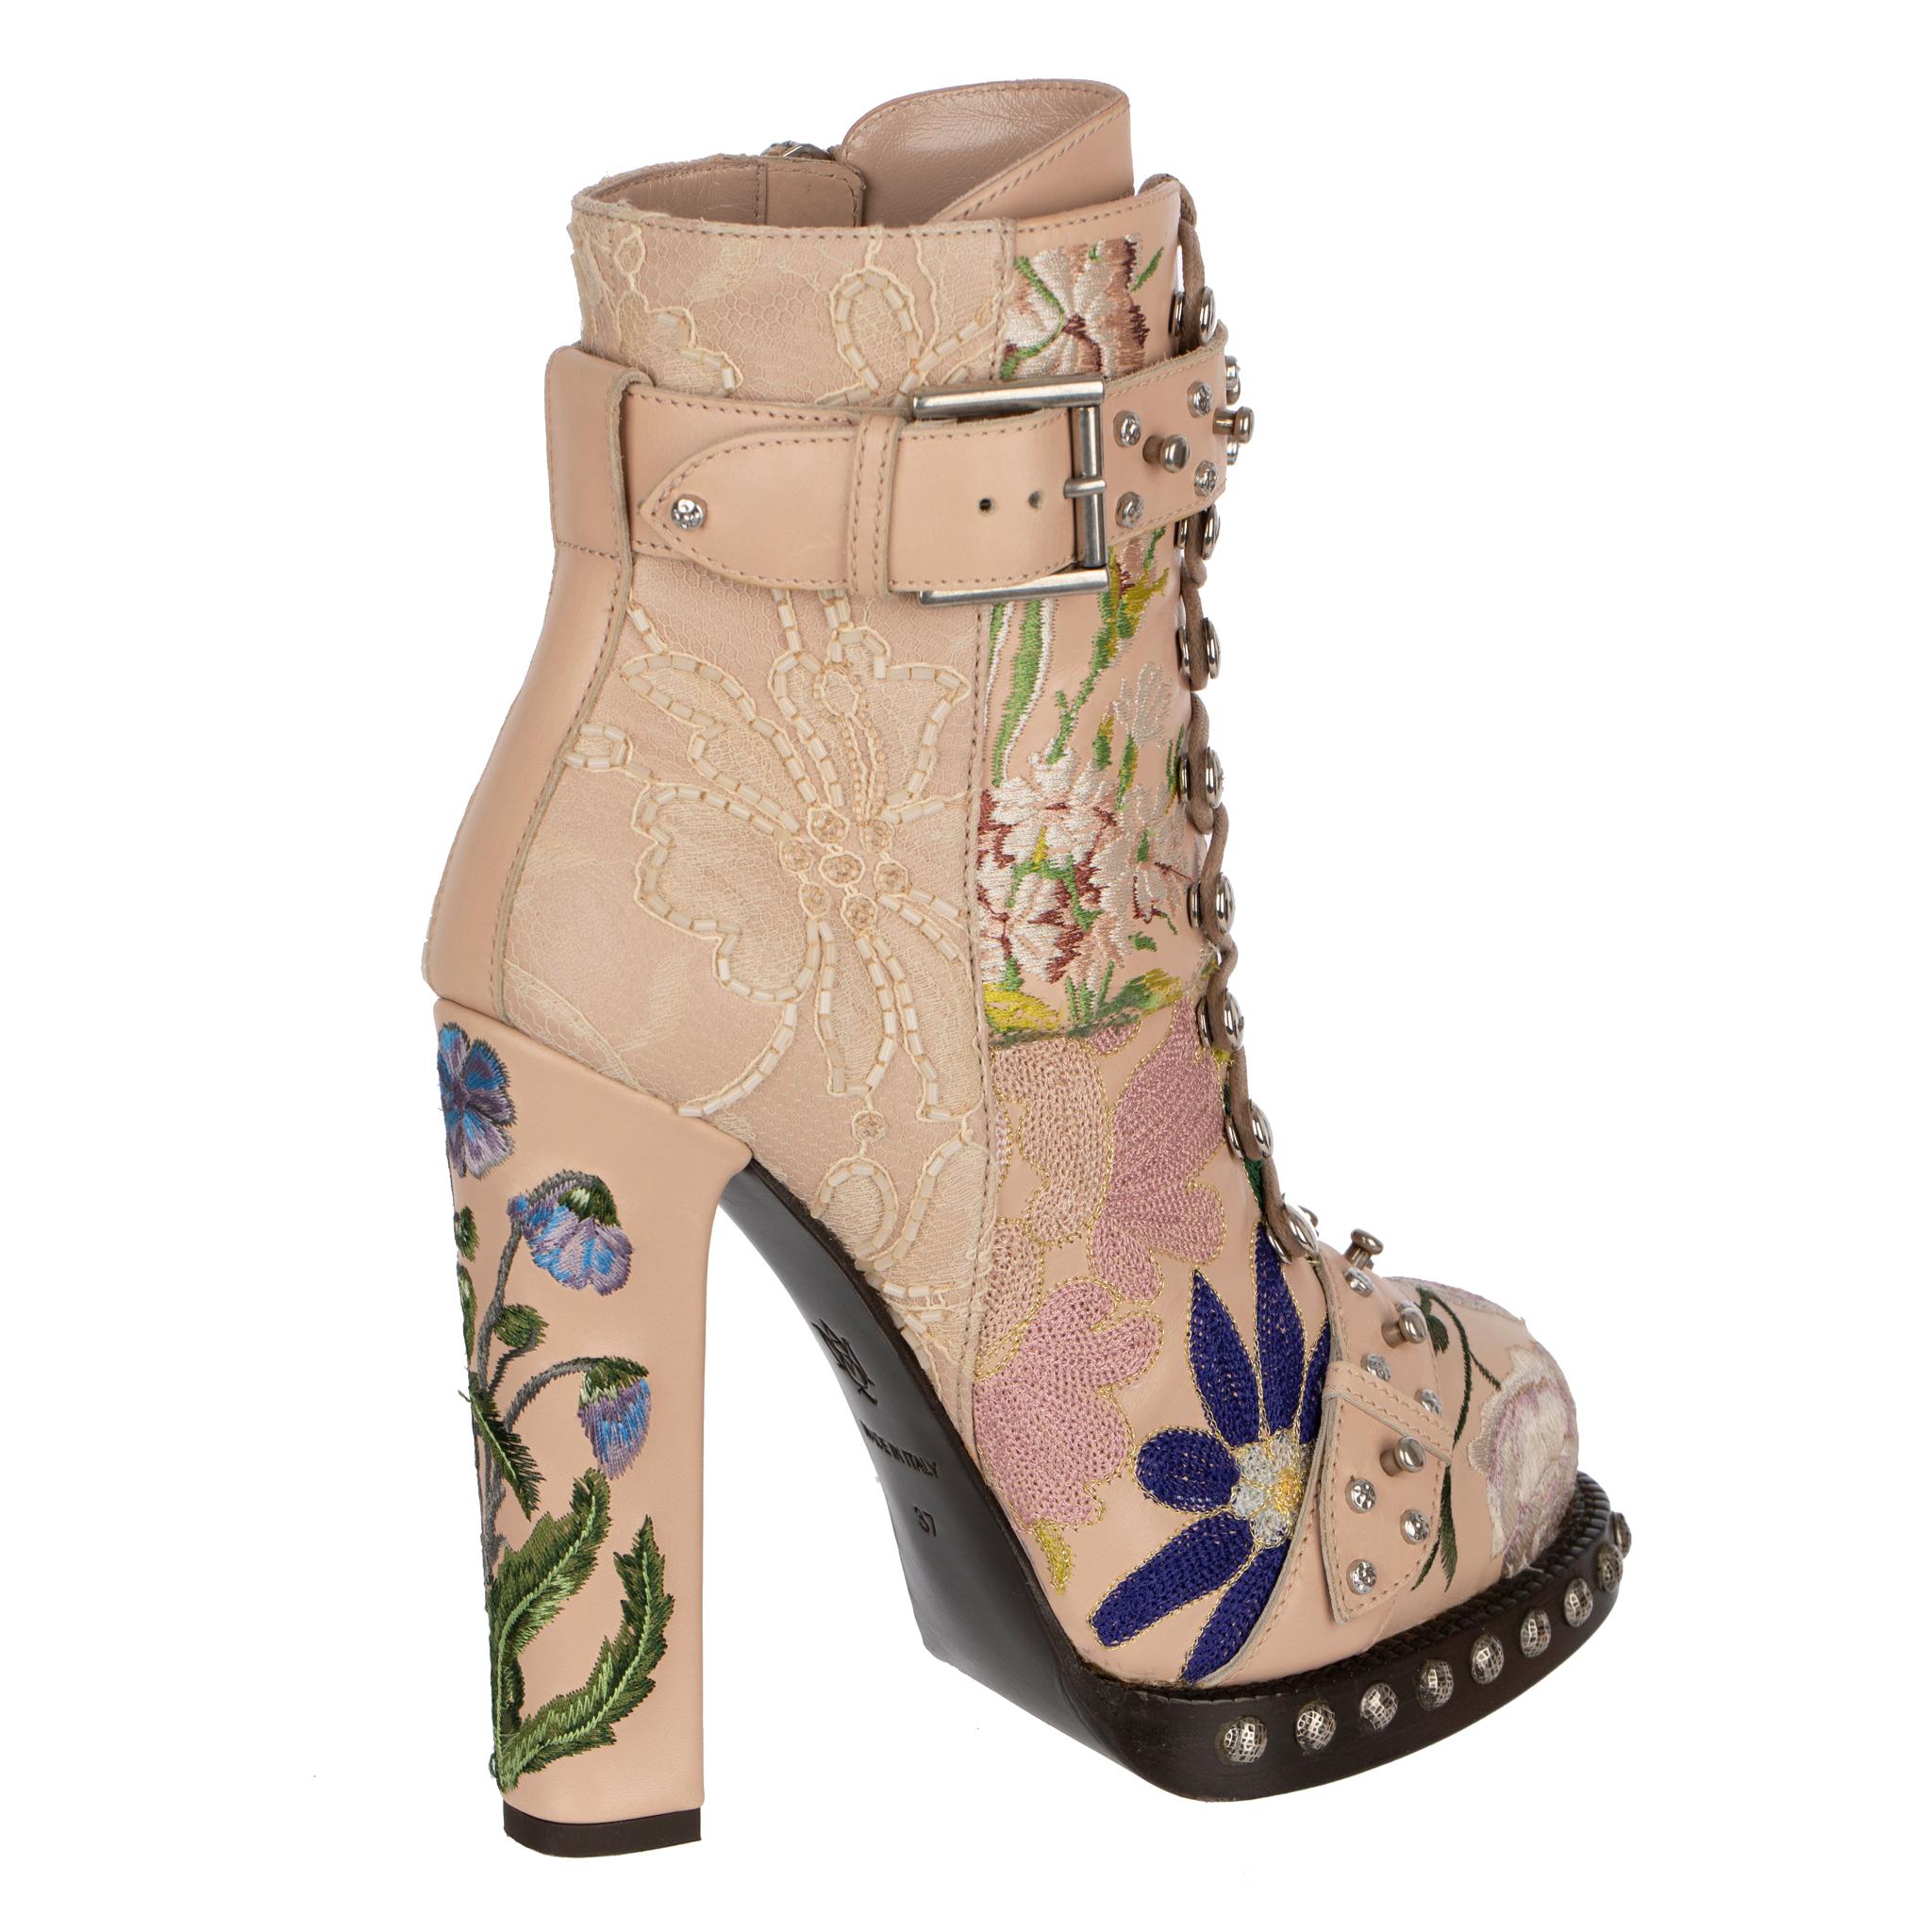 
Brand: Alexander McQueen

Product: High Heel Boots

Size: 37 Fr

Colour: Beige & Multicolour Embroidery

Heel: 14 Cm

Material: Leather

Condition: Pristine; Never Worn

Accompanied By: Alexander McQueen Box & Two Dustbags

This item has never been